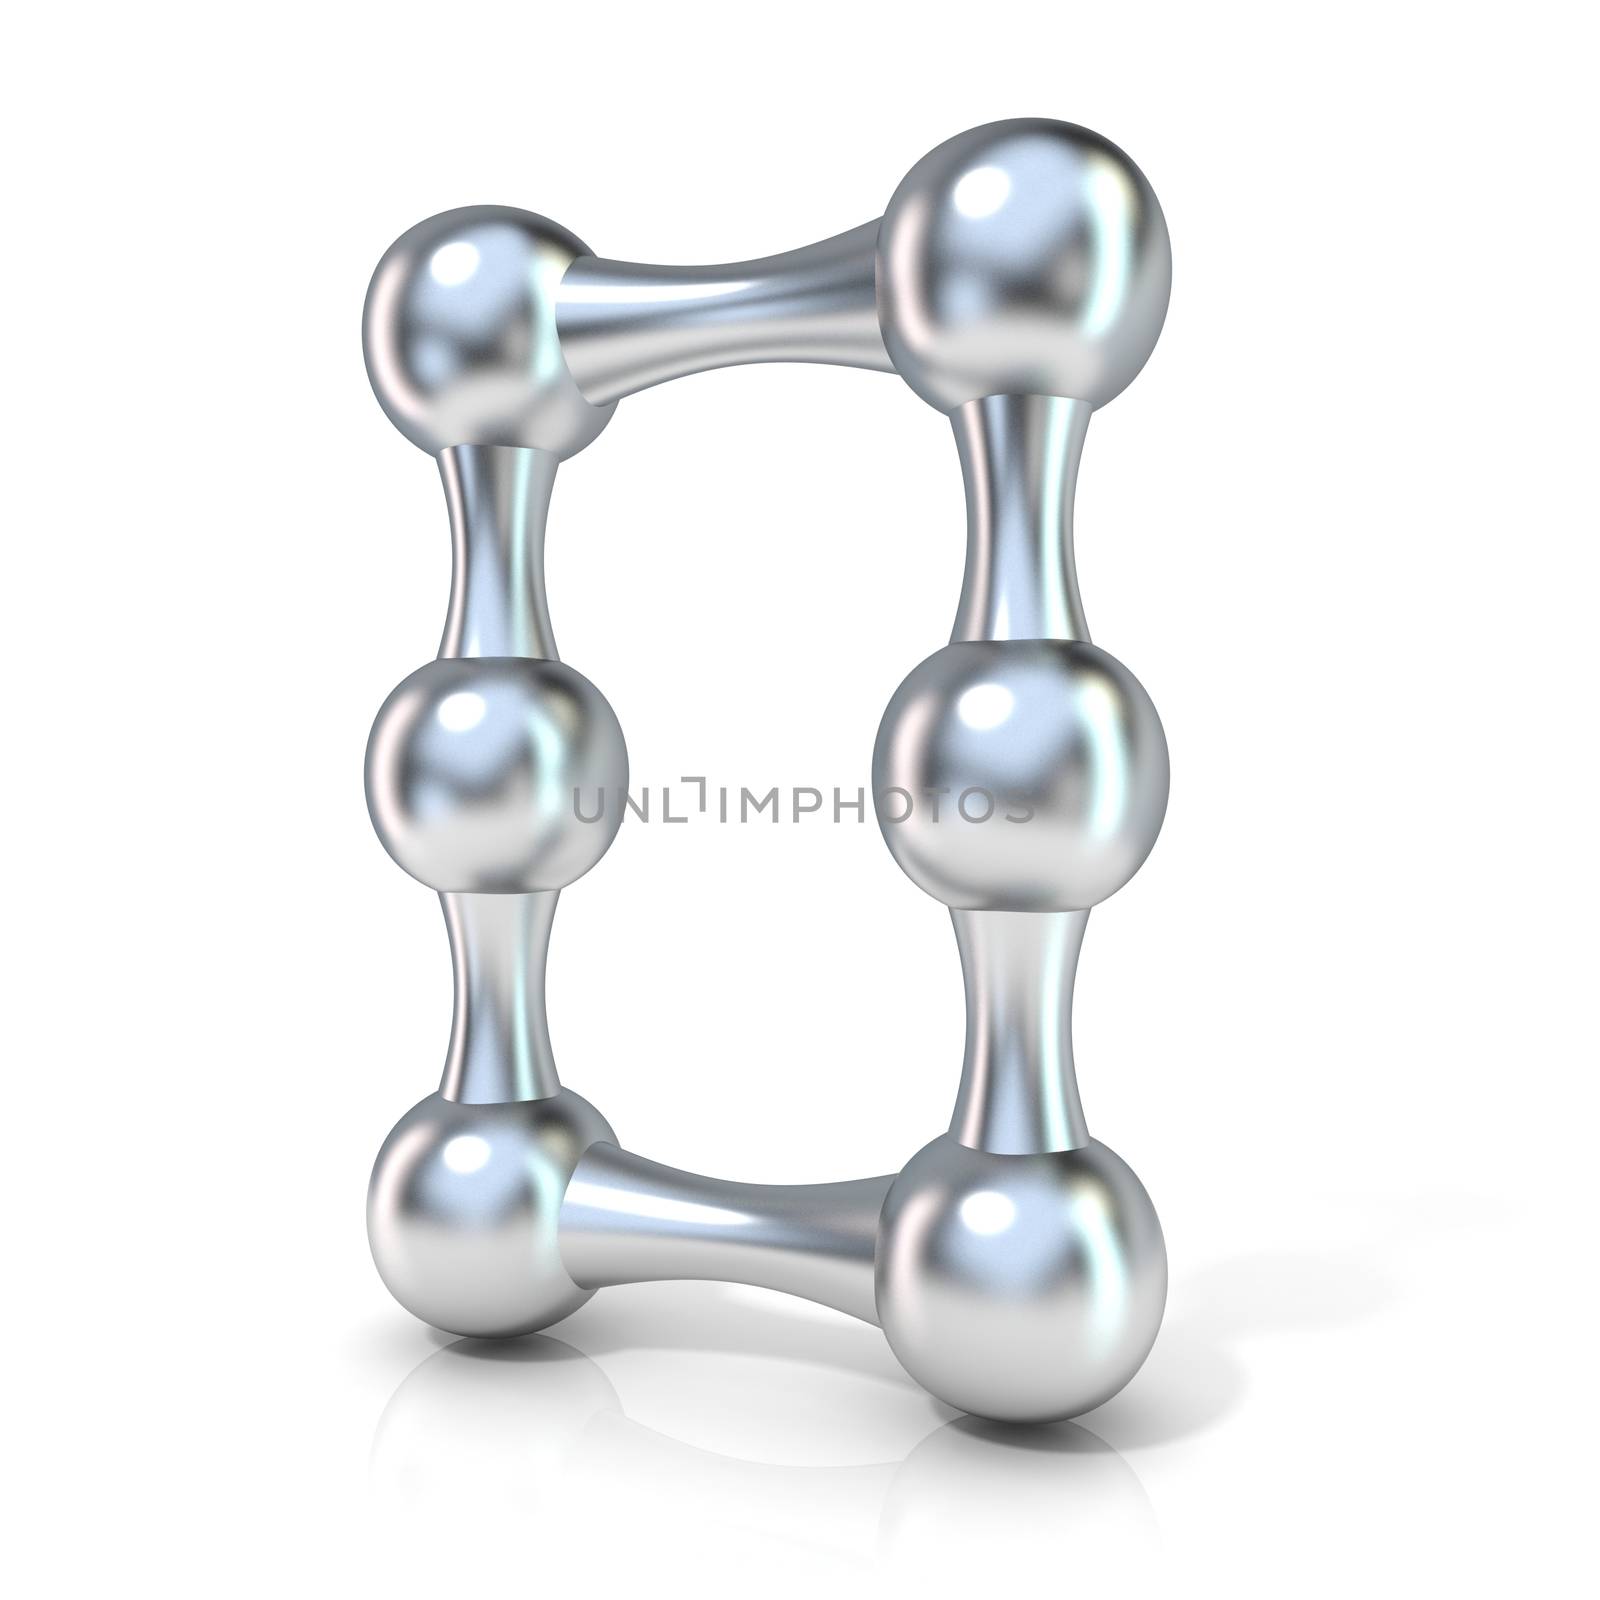 Molecular font numerical digits collection, 0 - ZERO. 3D render illustration isolated on white background.